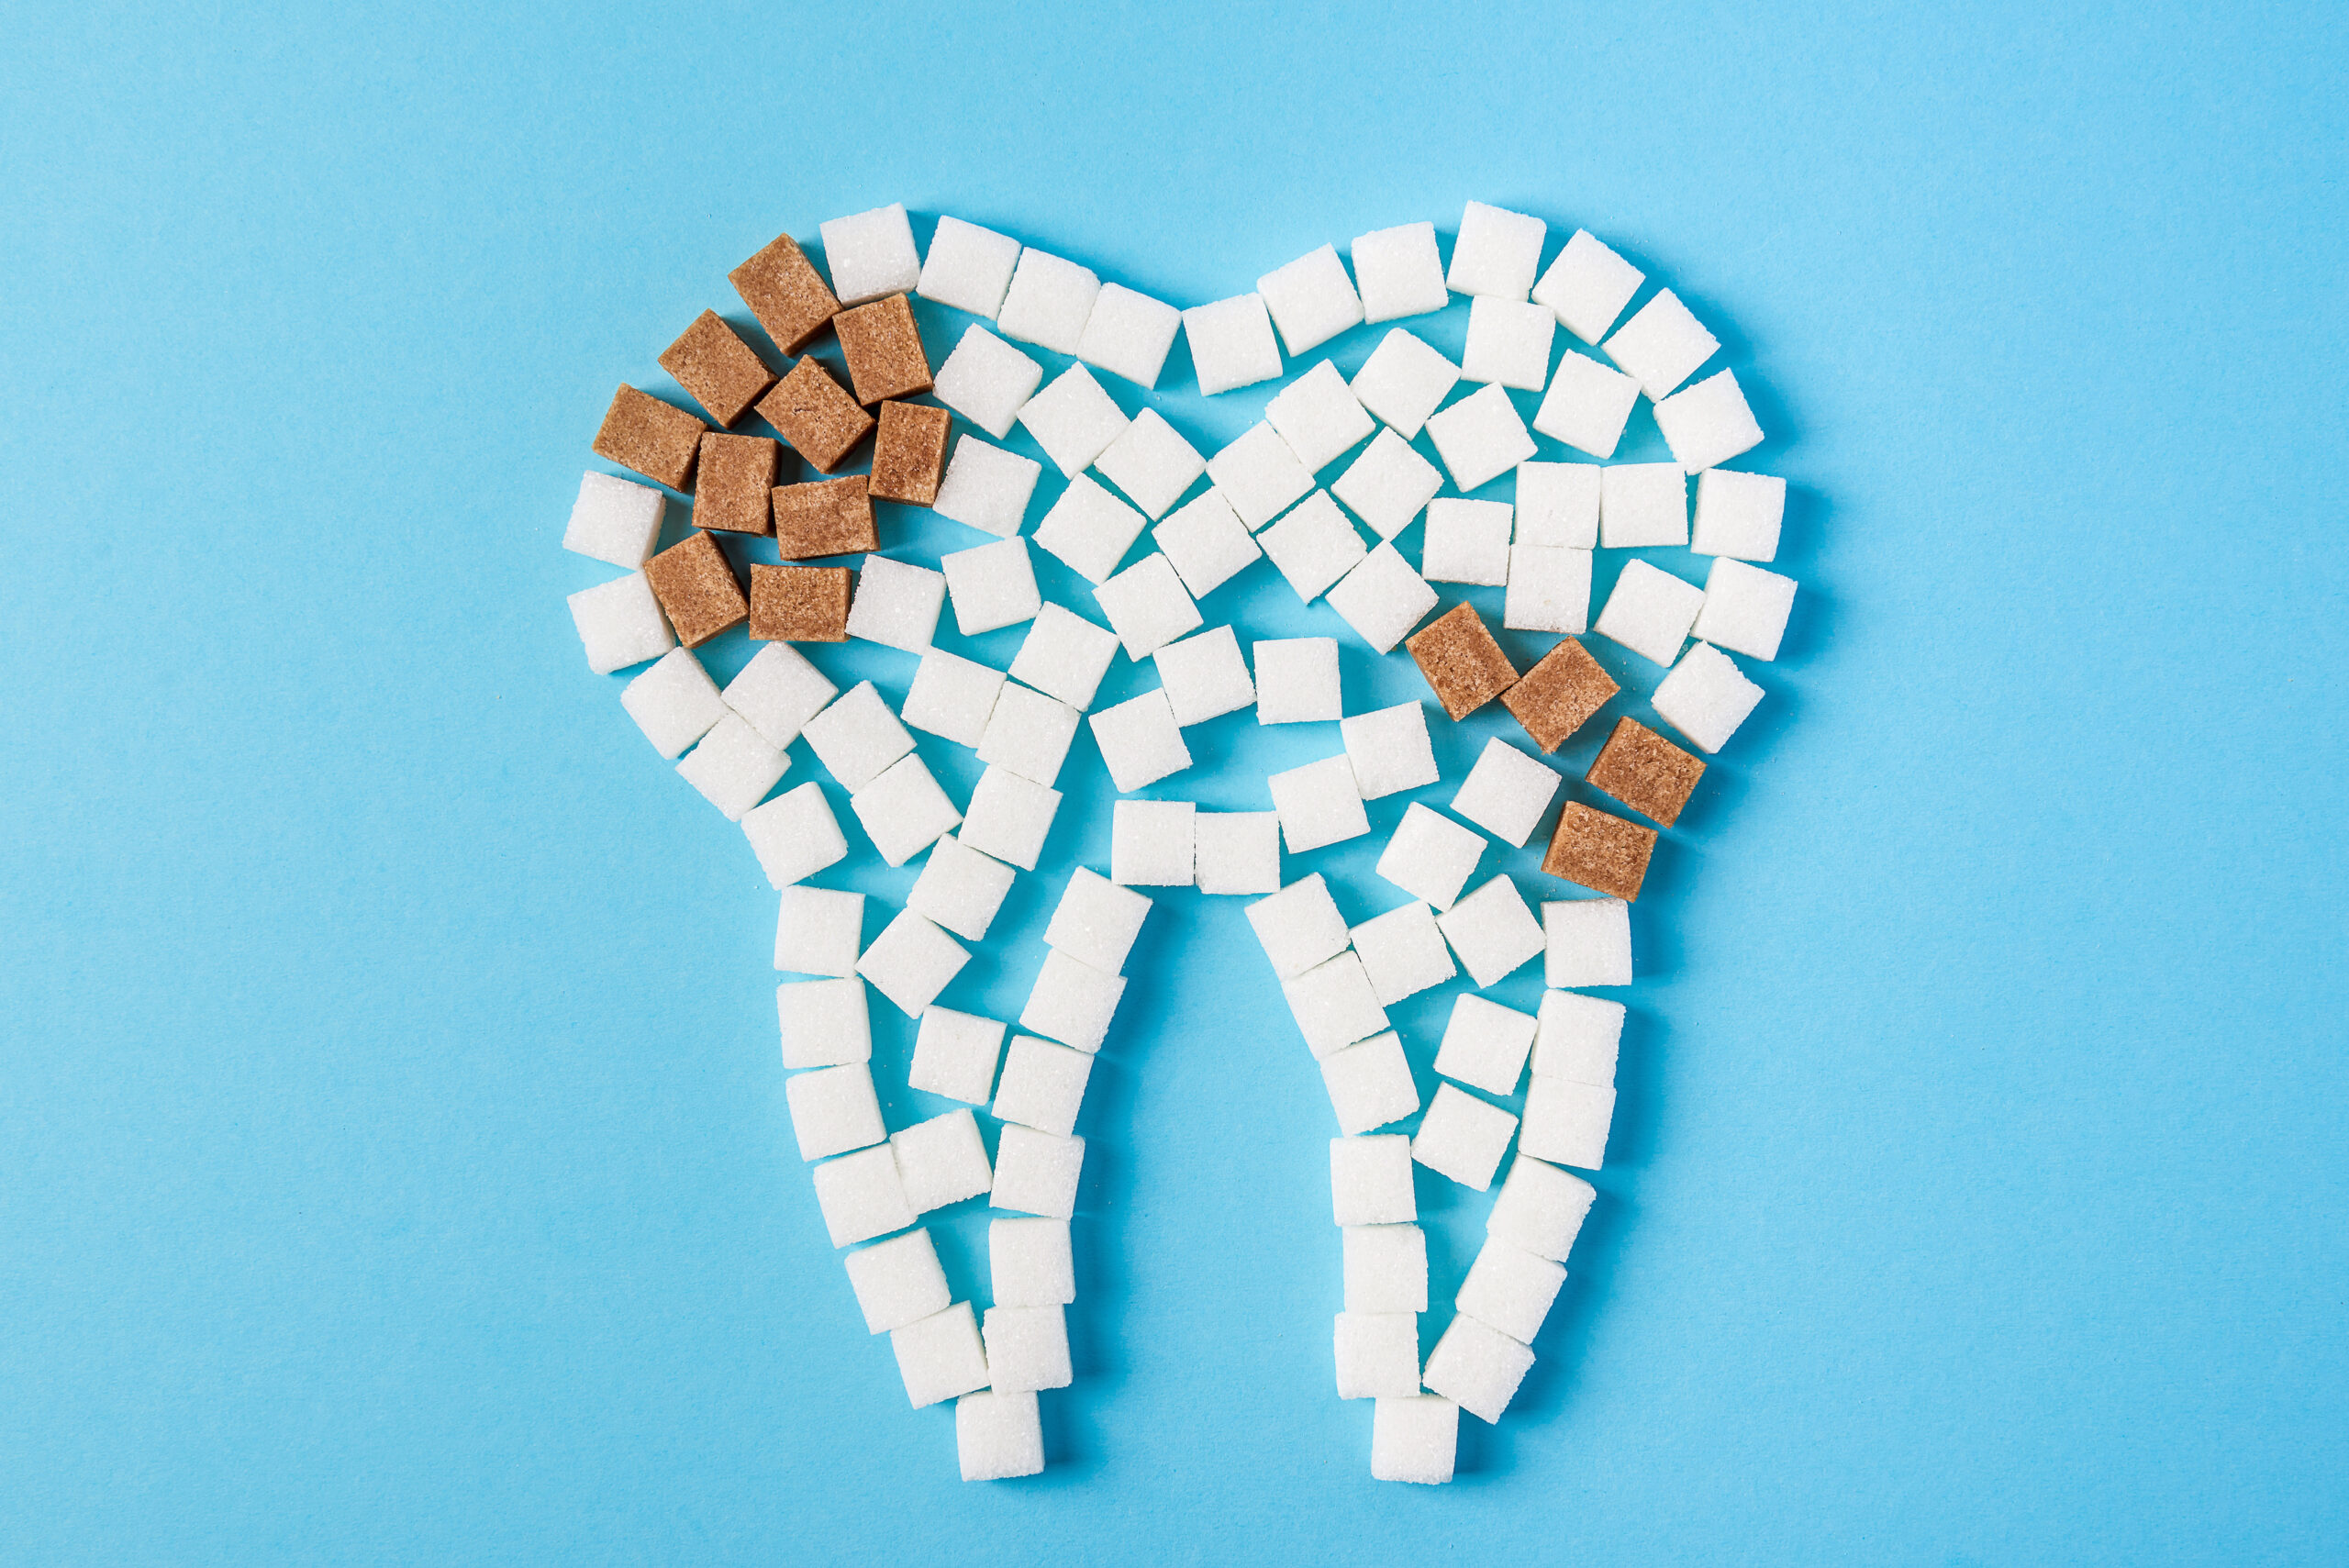 Sugar destroys the tooth enamel and leads to tooth decay. Tooth made of white sugar cubes and caries made of brown sugar cubes. Top view. Close up